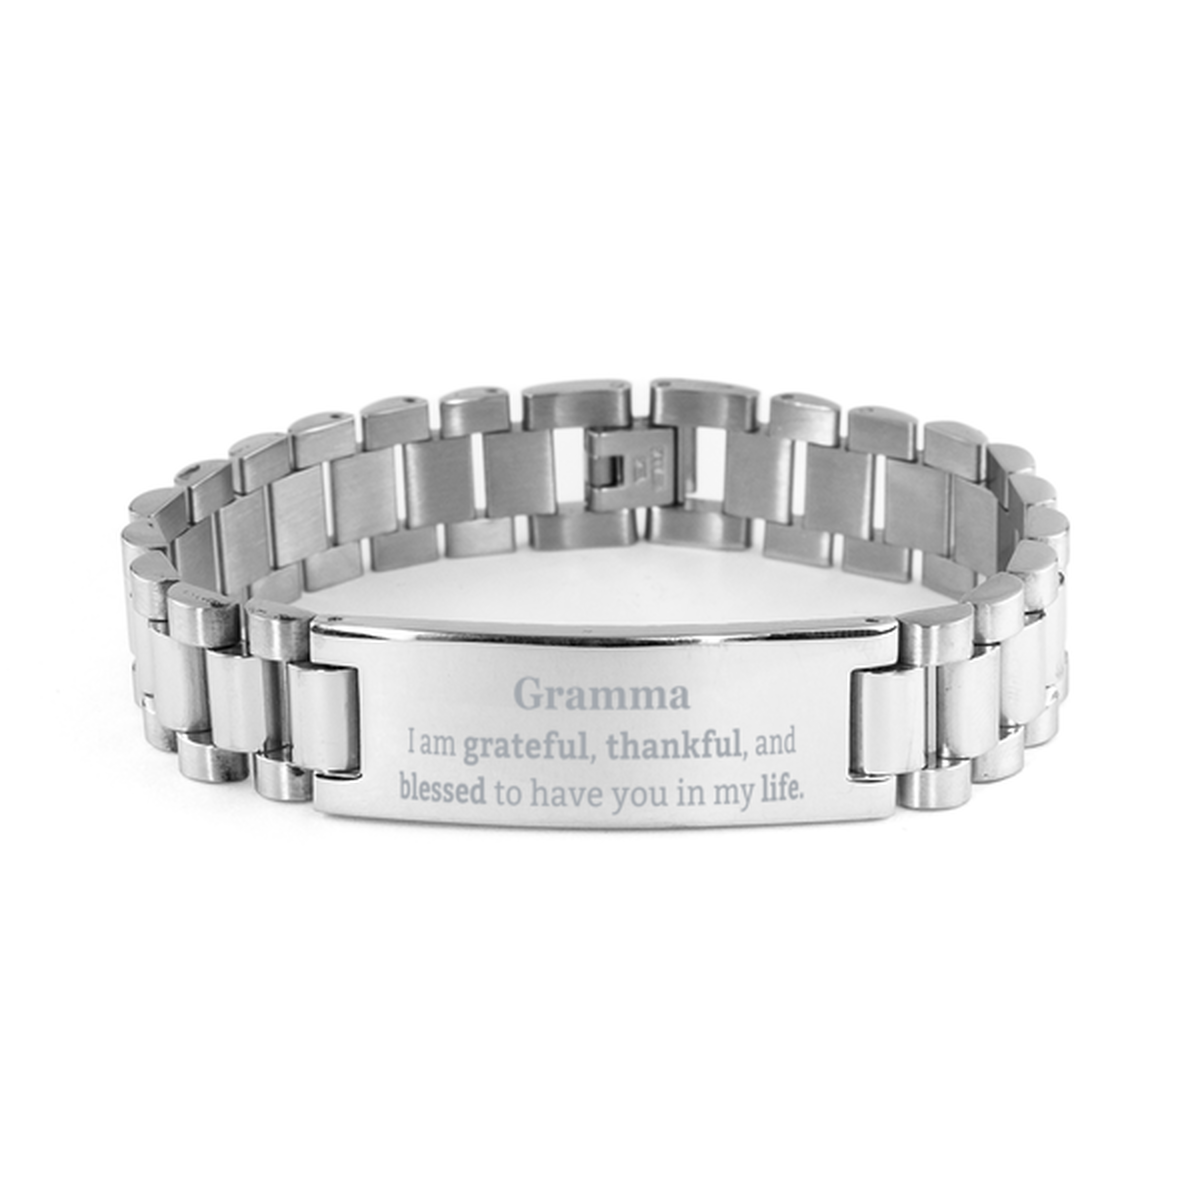 Gramma Appreciation Gifts, I am grateful, thankful, and blessed, Thank You Ladder Stainless Steel Bracelet for Gramma, Birthday Inspiration Gifts for Gramma